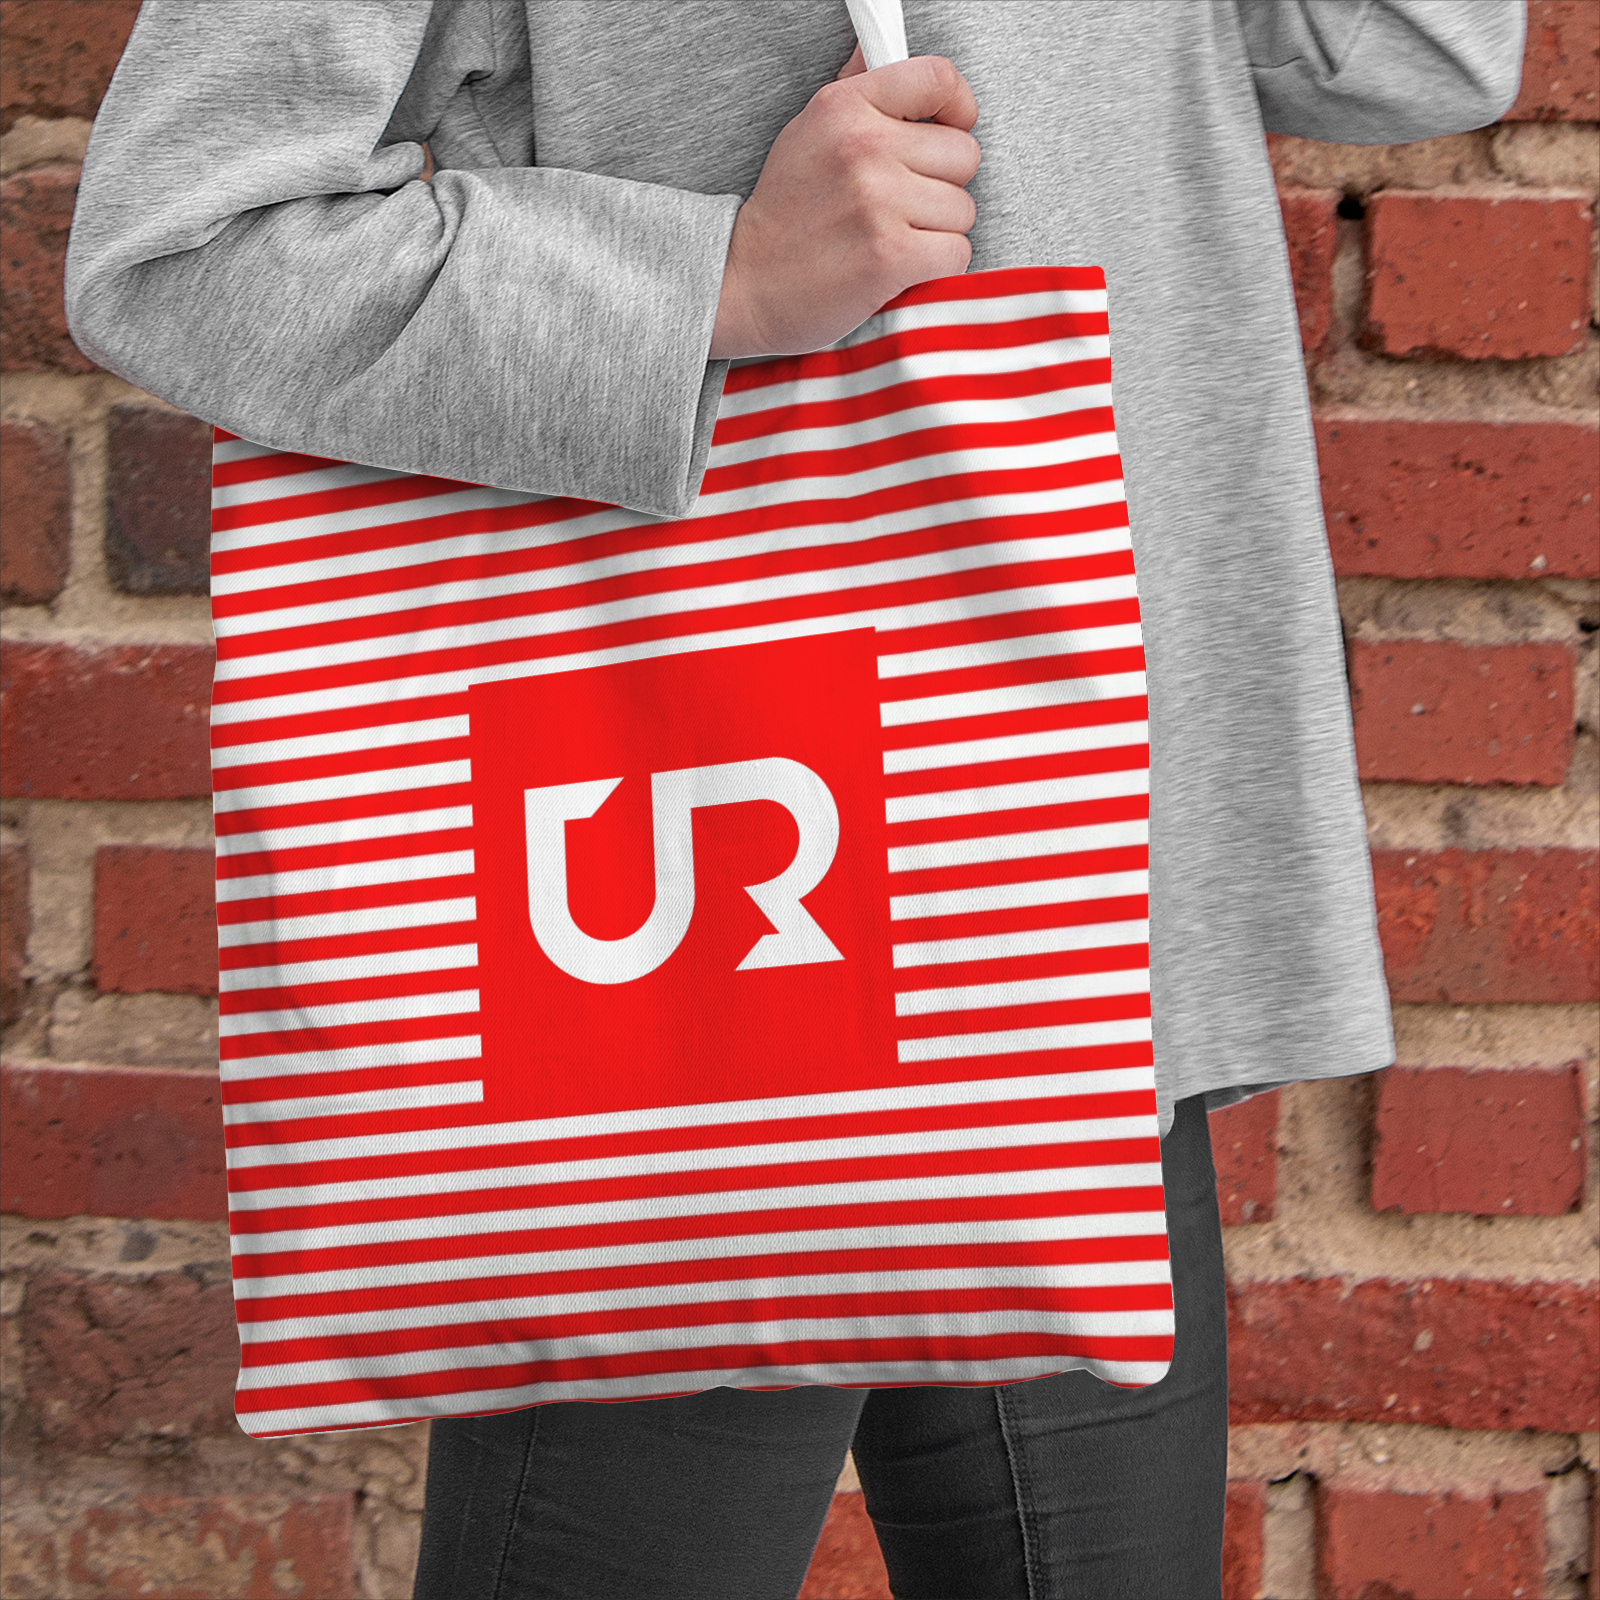 Heavy Duty and Strong Natural Cotton Canvas Tote Bag - UGO ROMANO URTB038